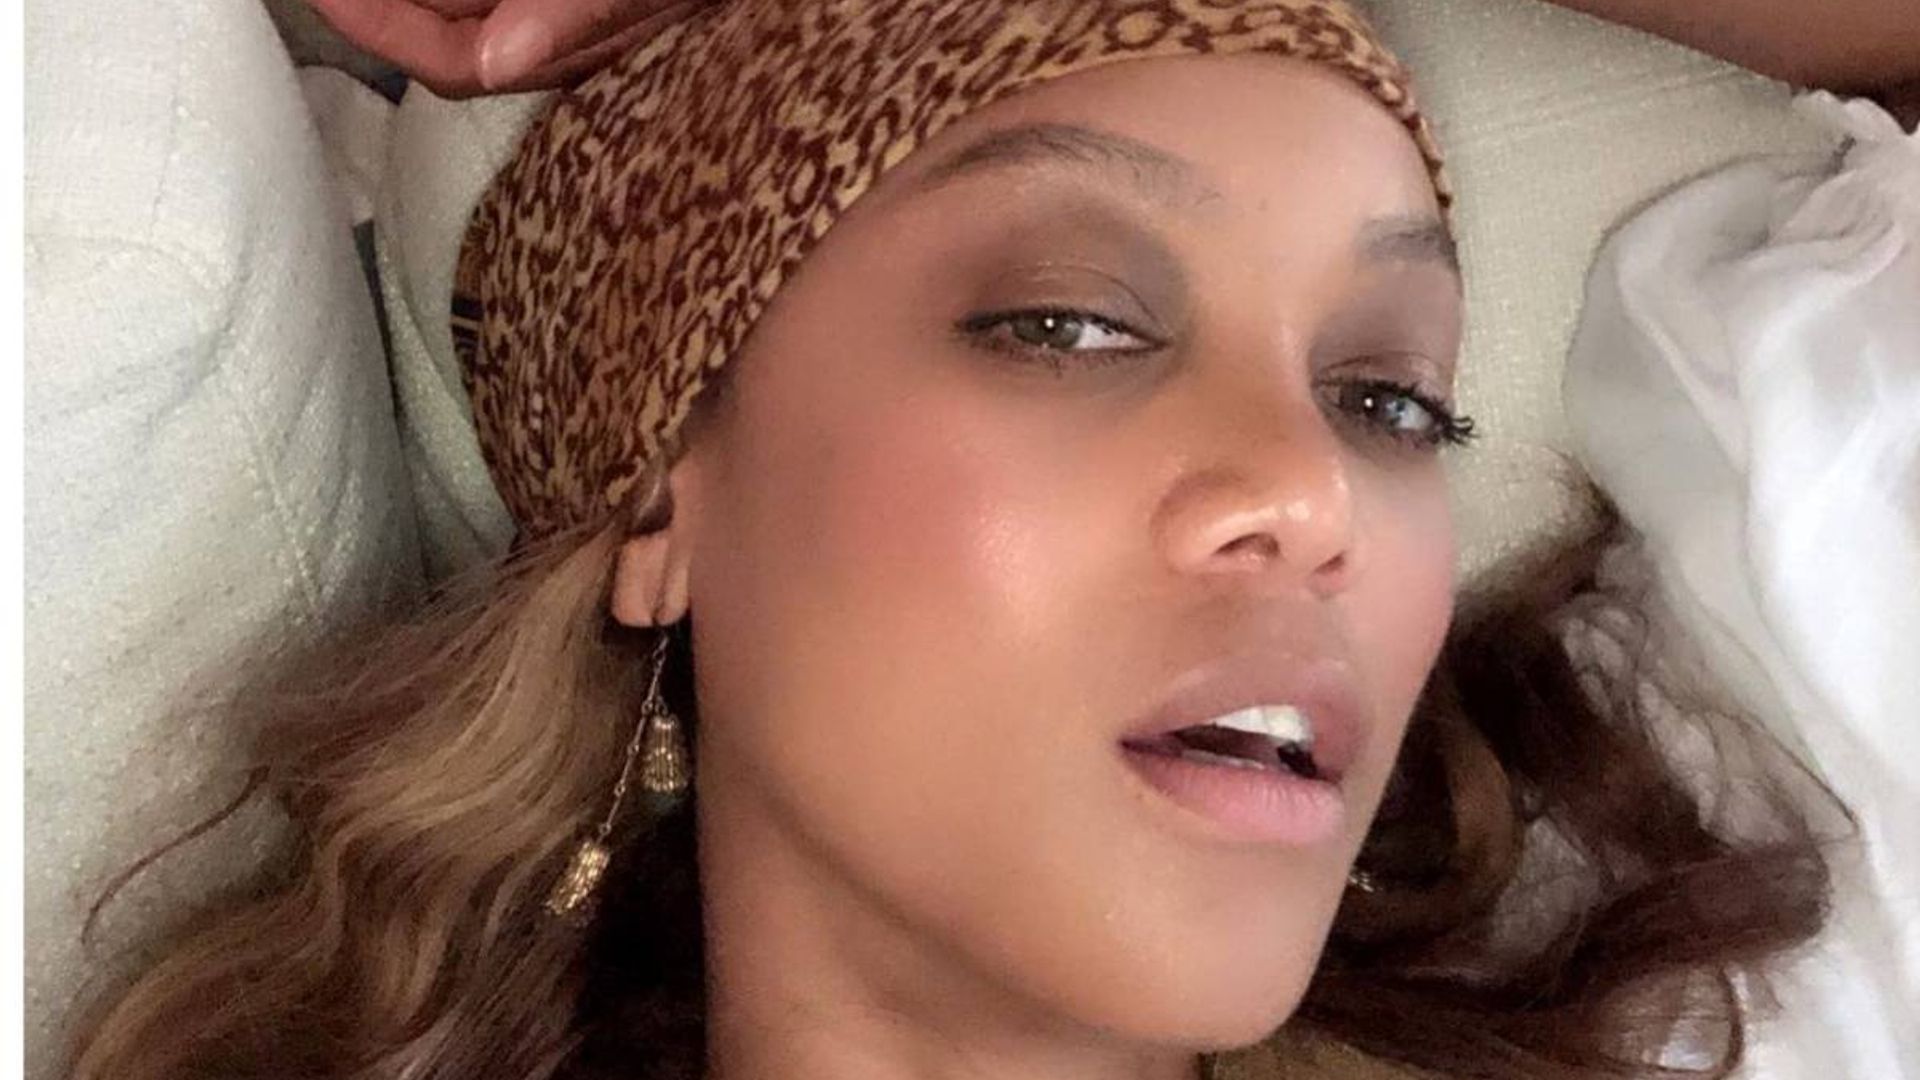 Tyra Banks stuns in barely there photos in her bed - and fans react | HELLO!